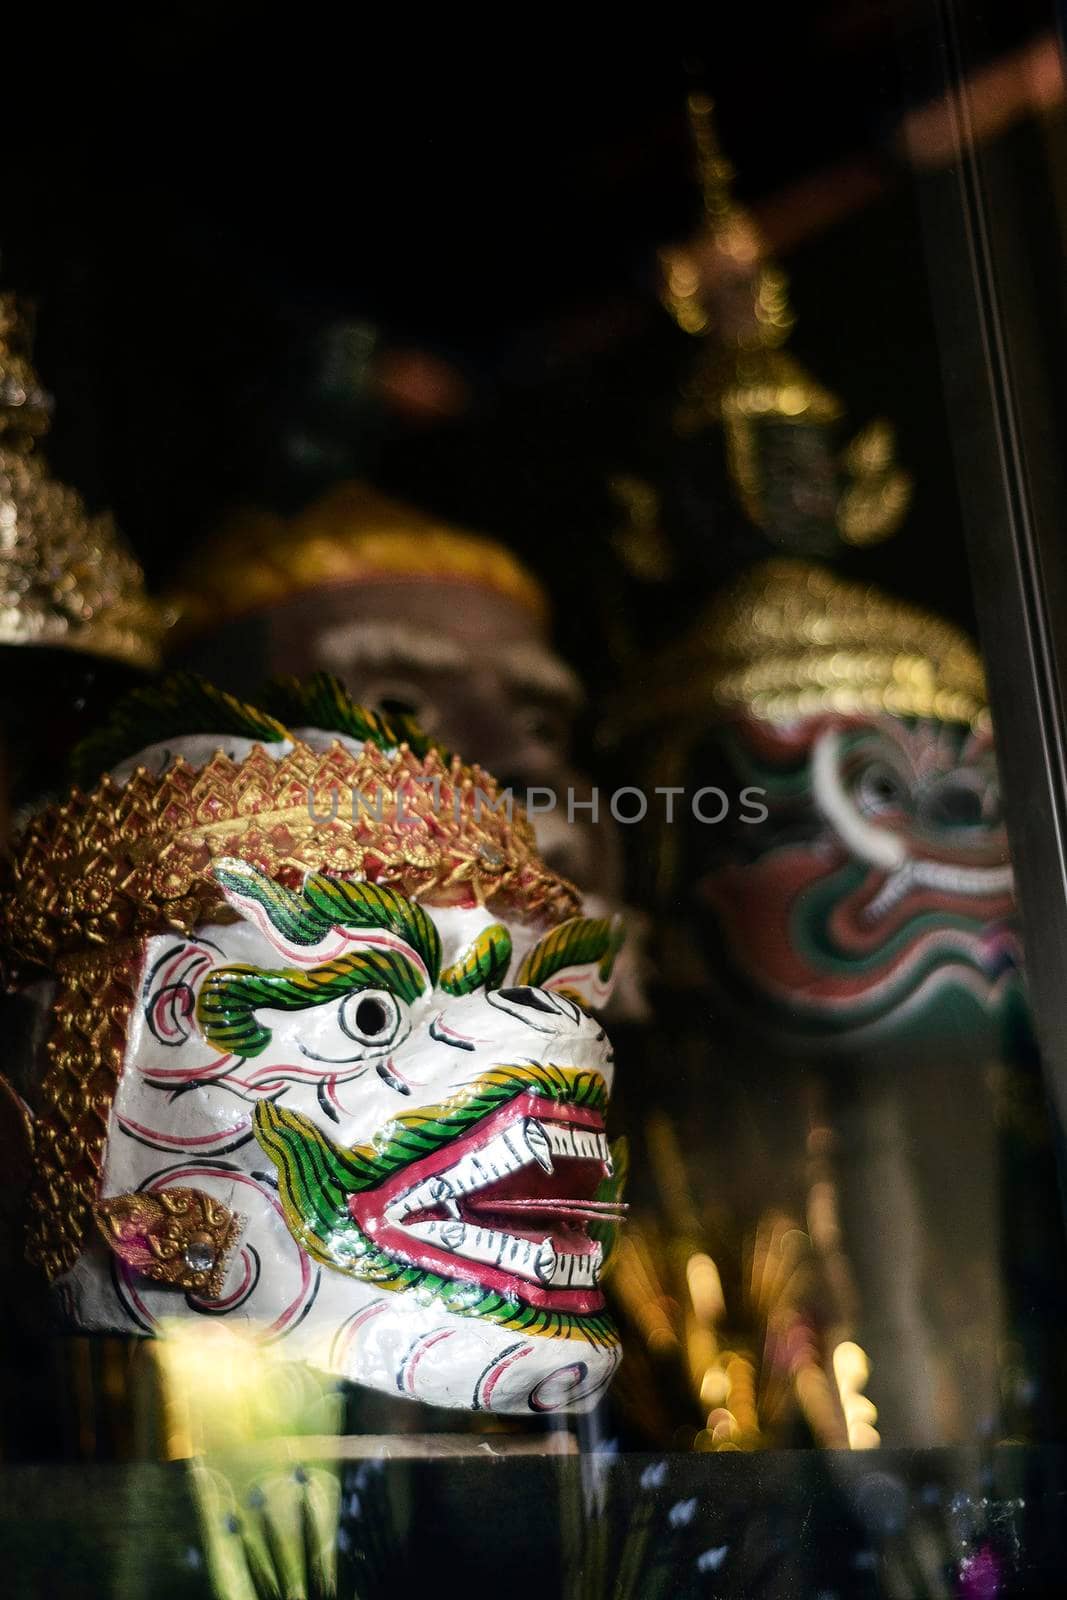 traditional lakhon khol khmer dance masks in display in cambodia by jackmalipan